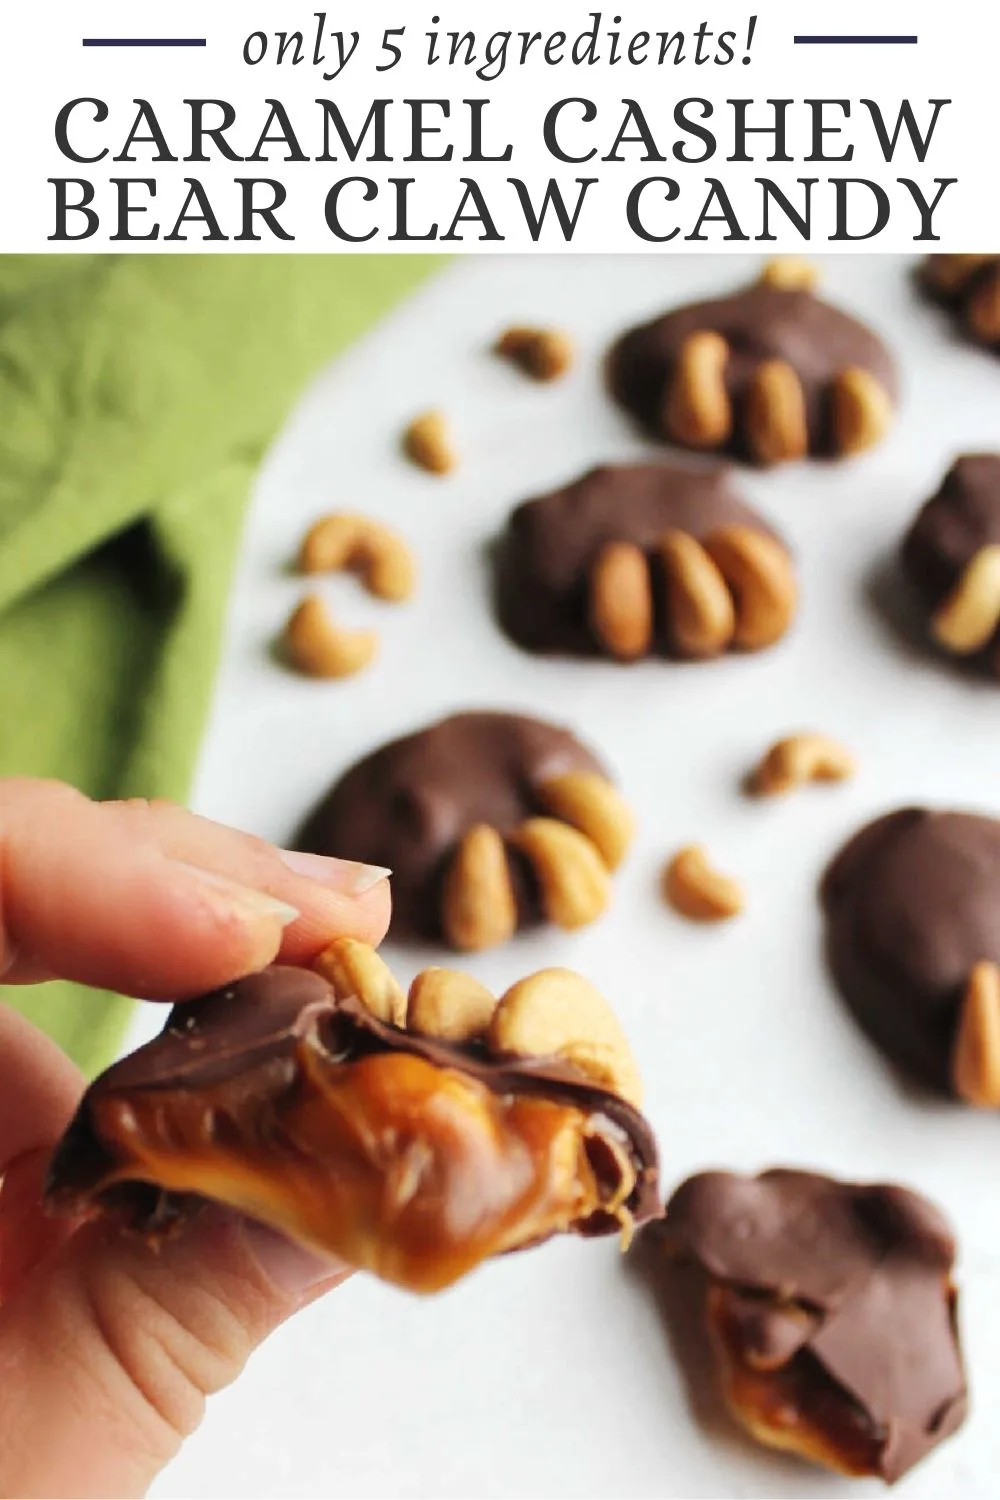 Soft delicious caramel, salty cashews and a delicious coating of milk chocolate come together to make these fun bear claw candies. They are simple to make, cute and oh so tasty!